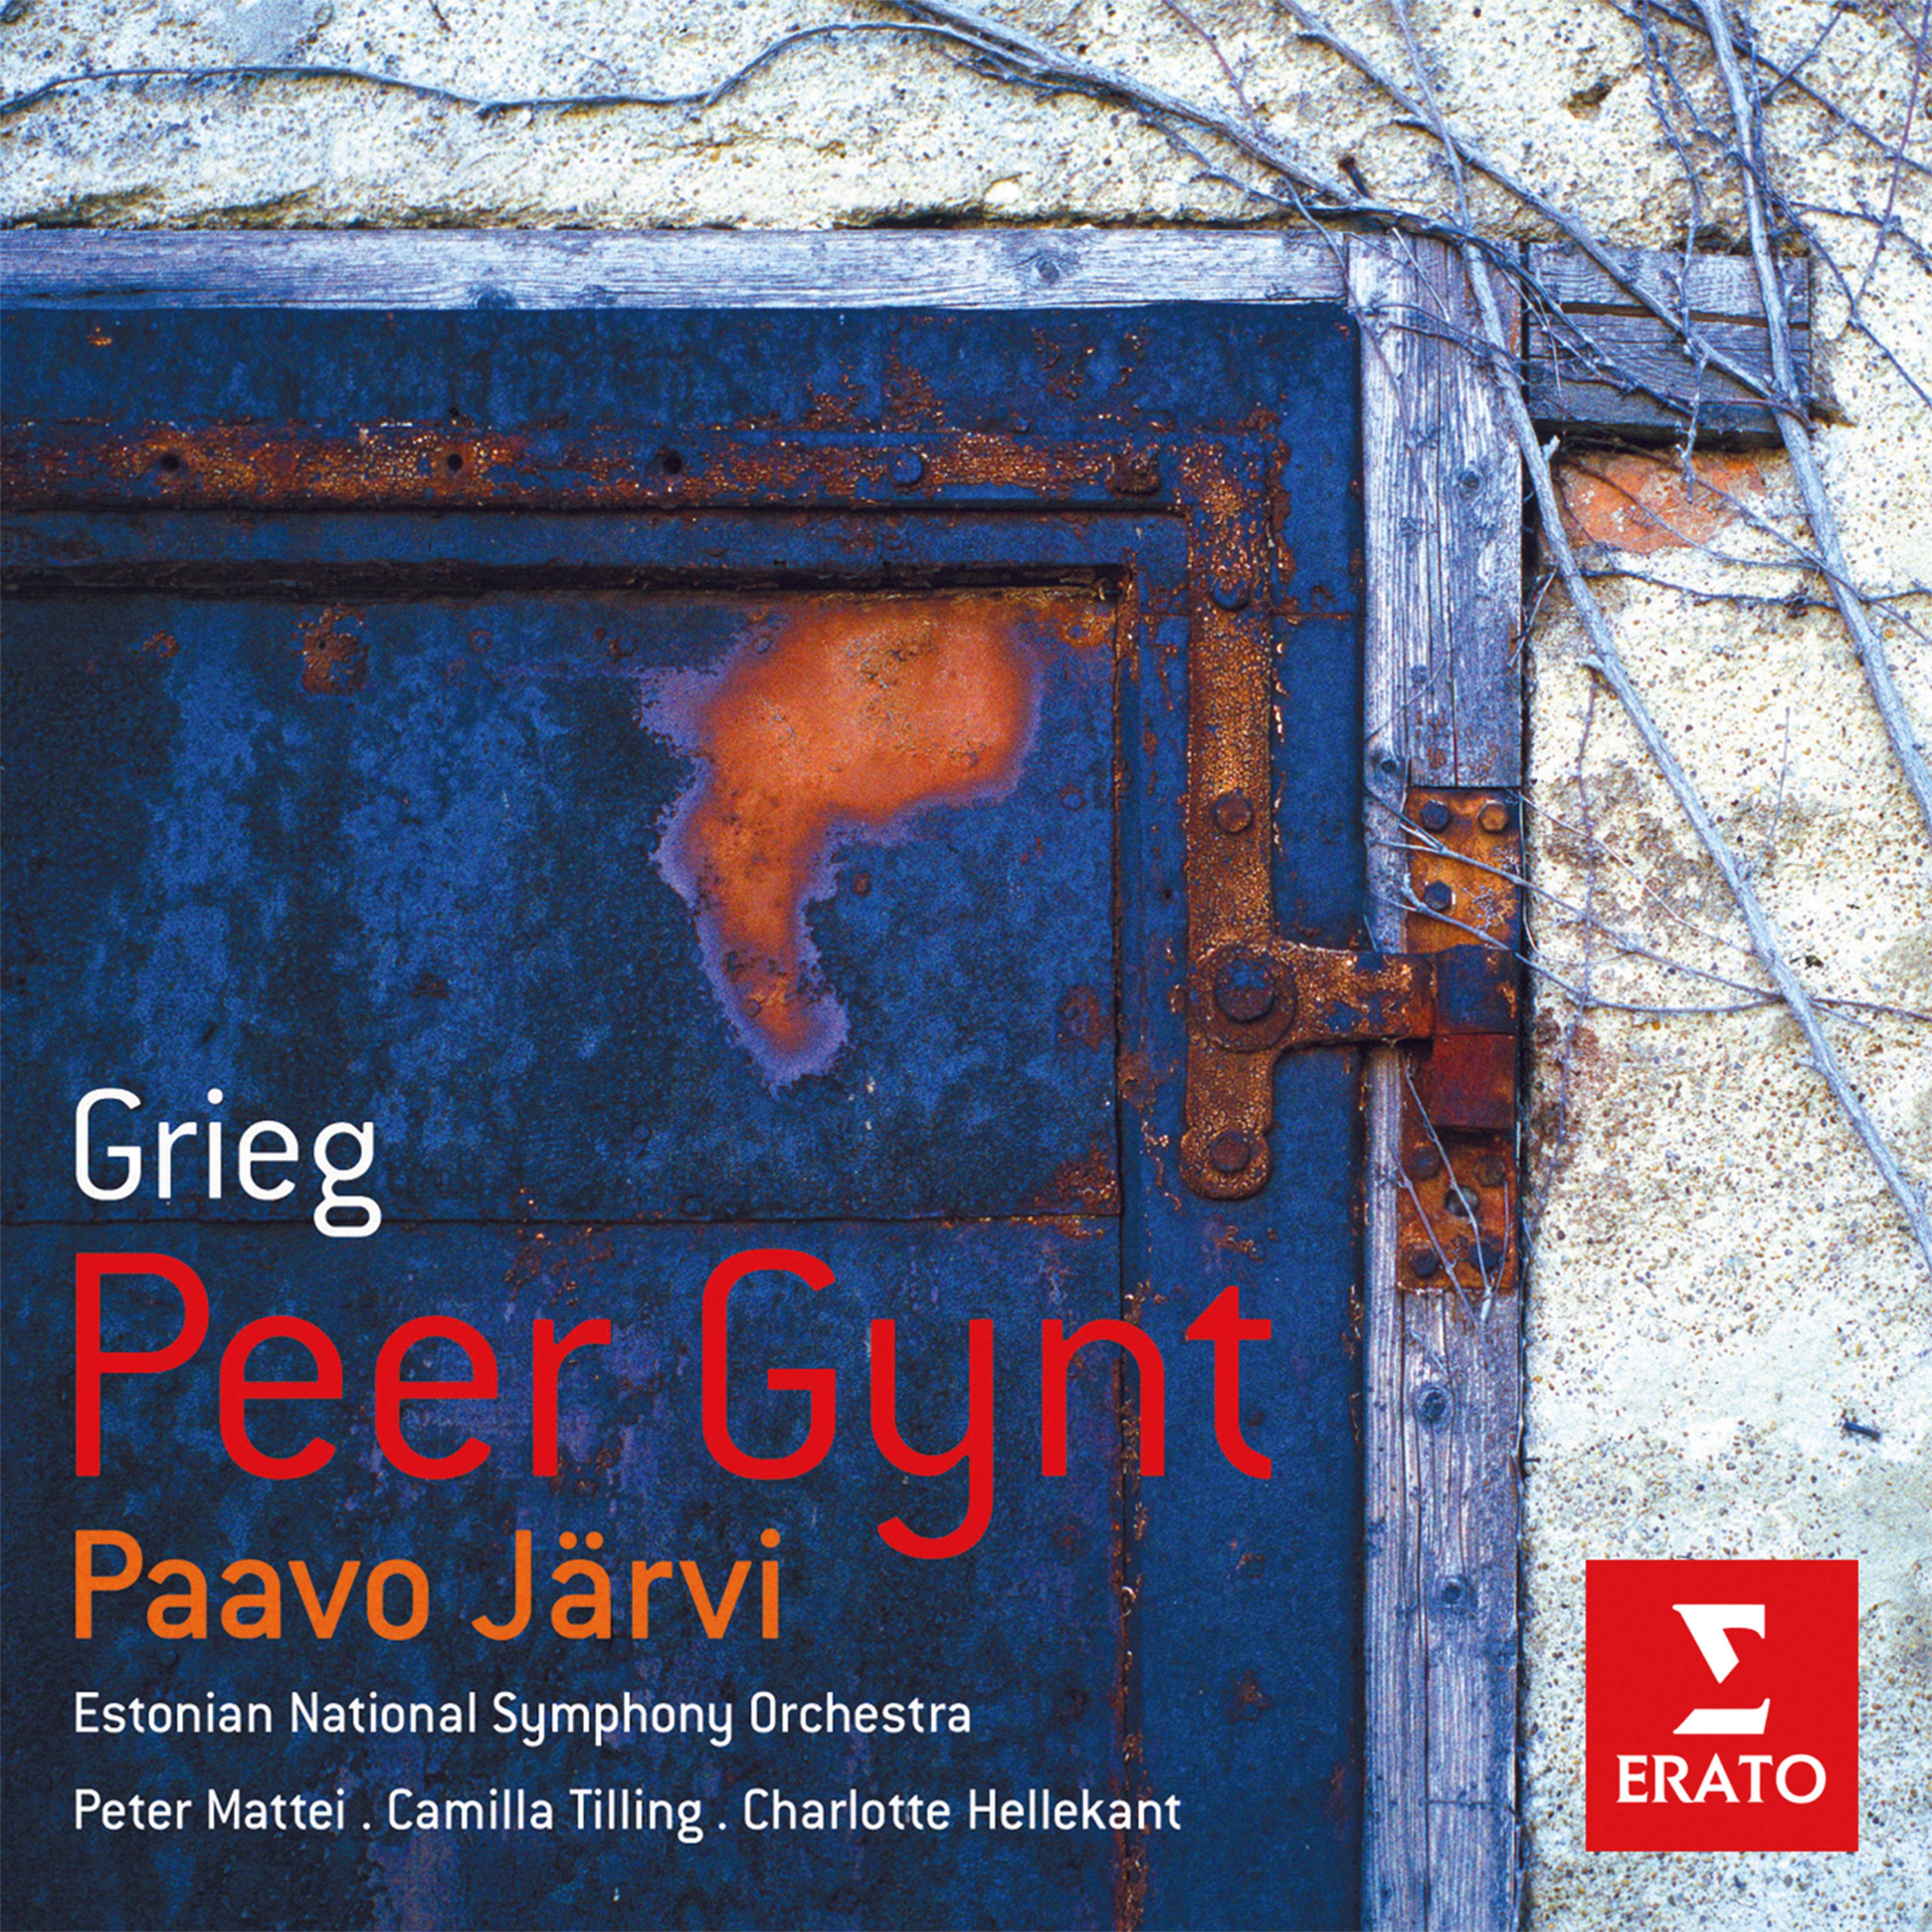 Peer Gynt, Op. 23, Act IV:No. 20, Peer Gynt at the Statue of Memnon